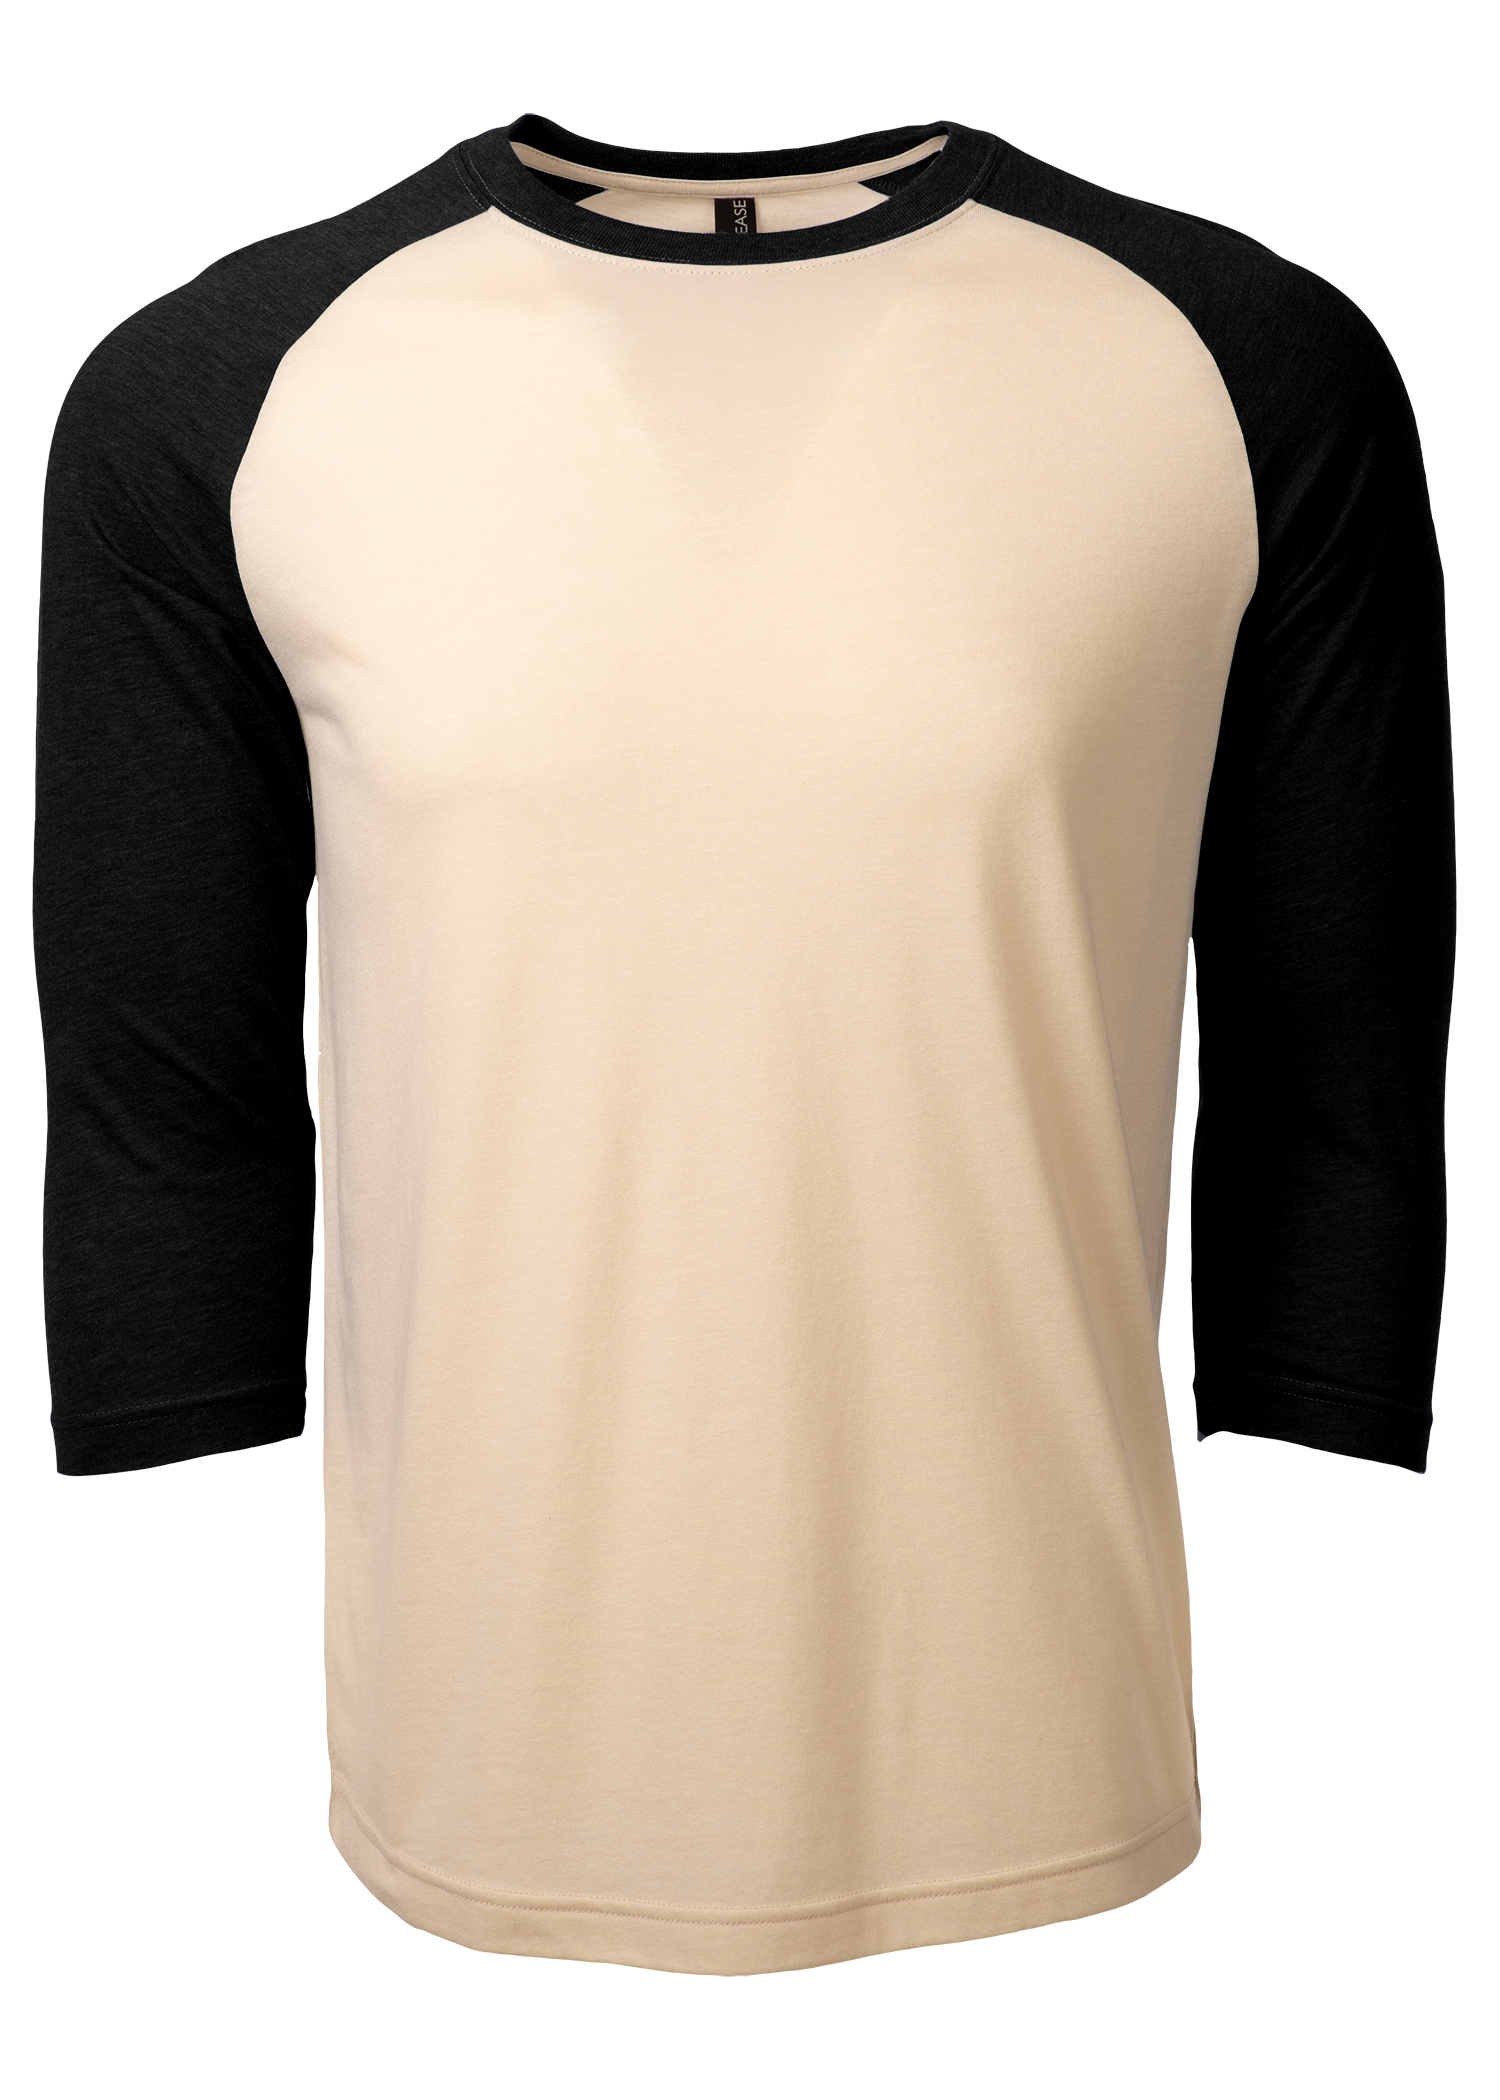 click to view Oatmeal Heather/Black